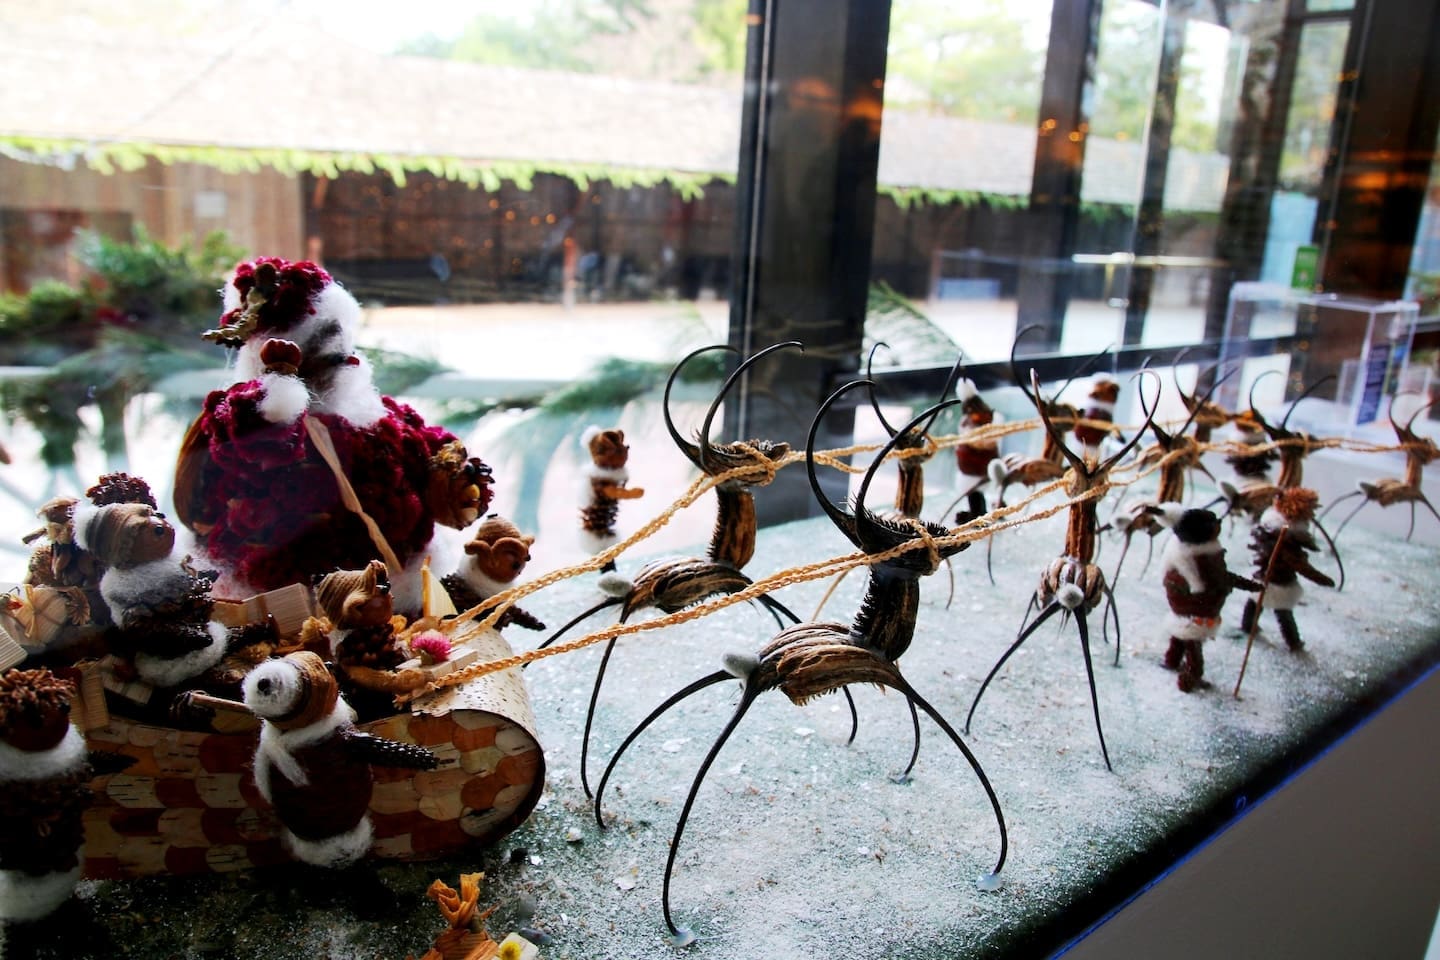 "Critter" ornaments have been a Christmas tradition at the Brandywine River Museum of Art for decades. (Brandywine River Museum of Art)